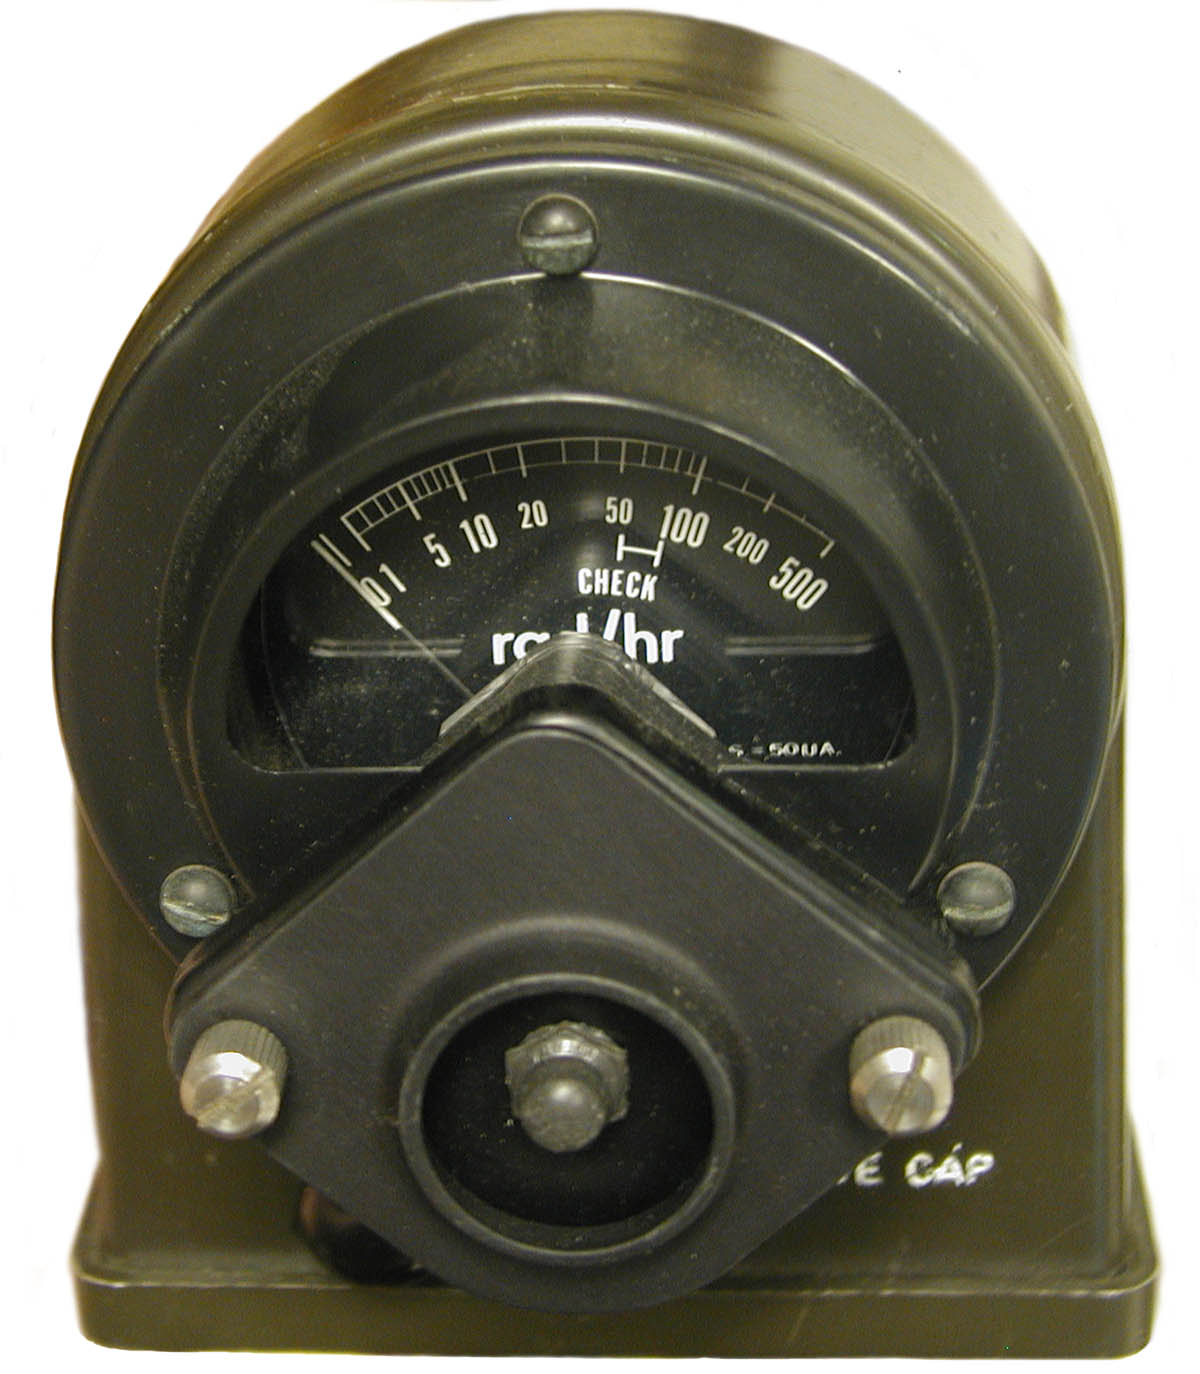  IM-174A&B/PD Ion Chamber Survey Meters